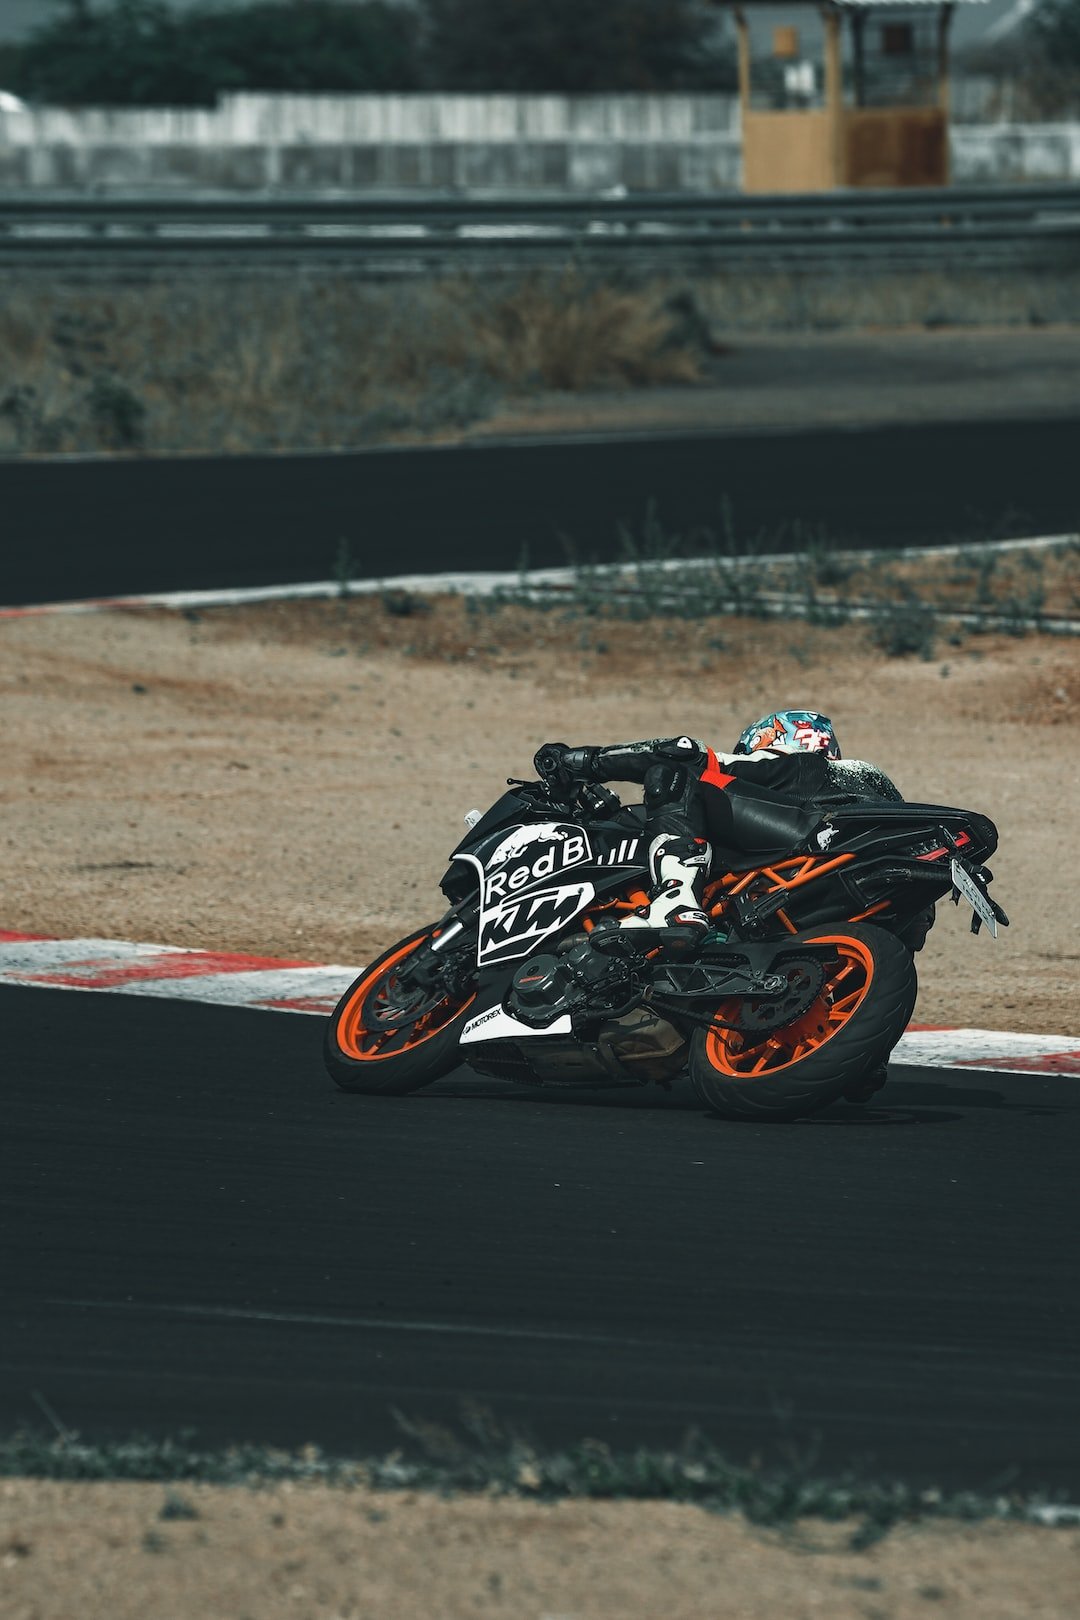 man in black and white motorcycle helmet riding on black and orange sports bike